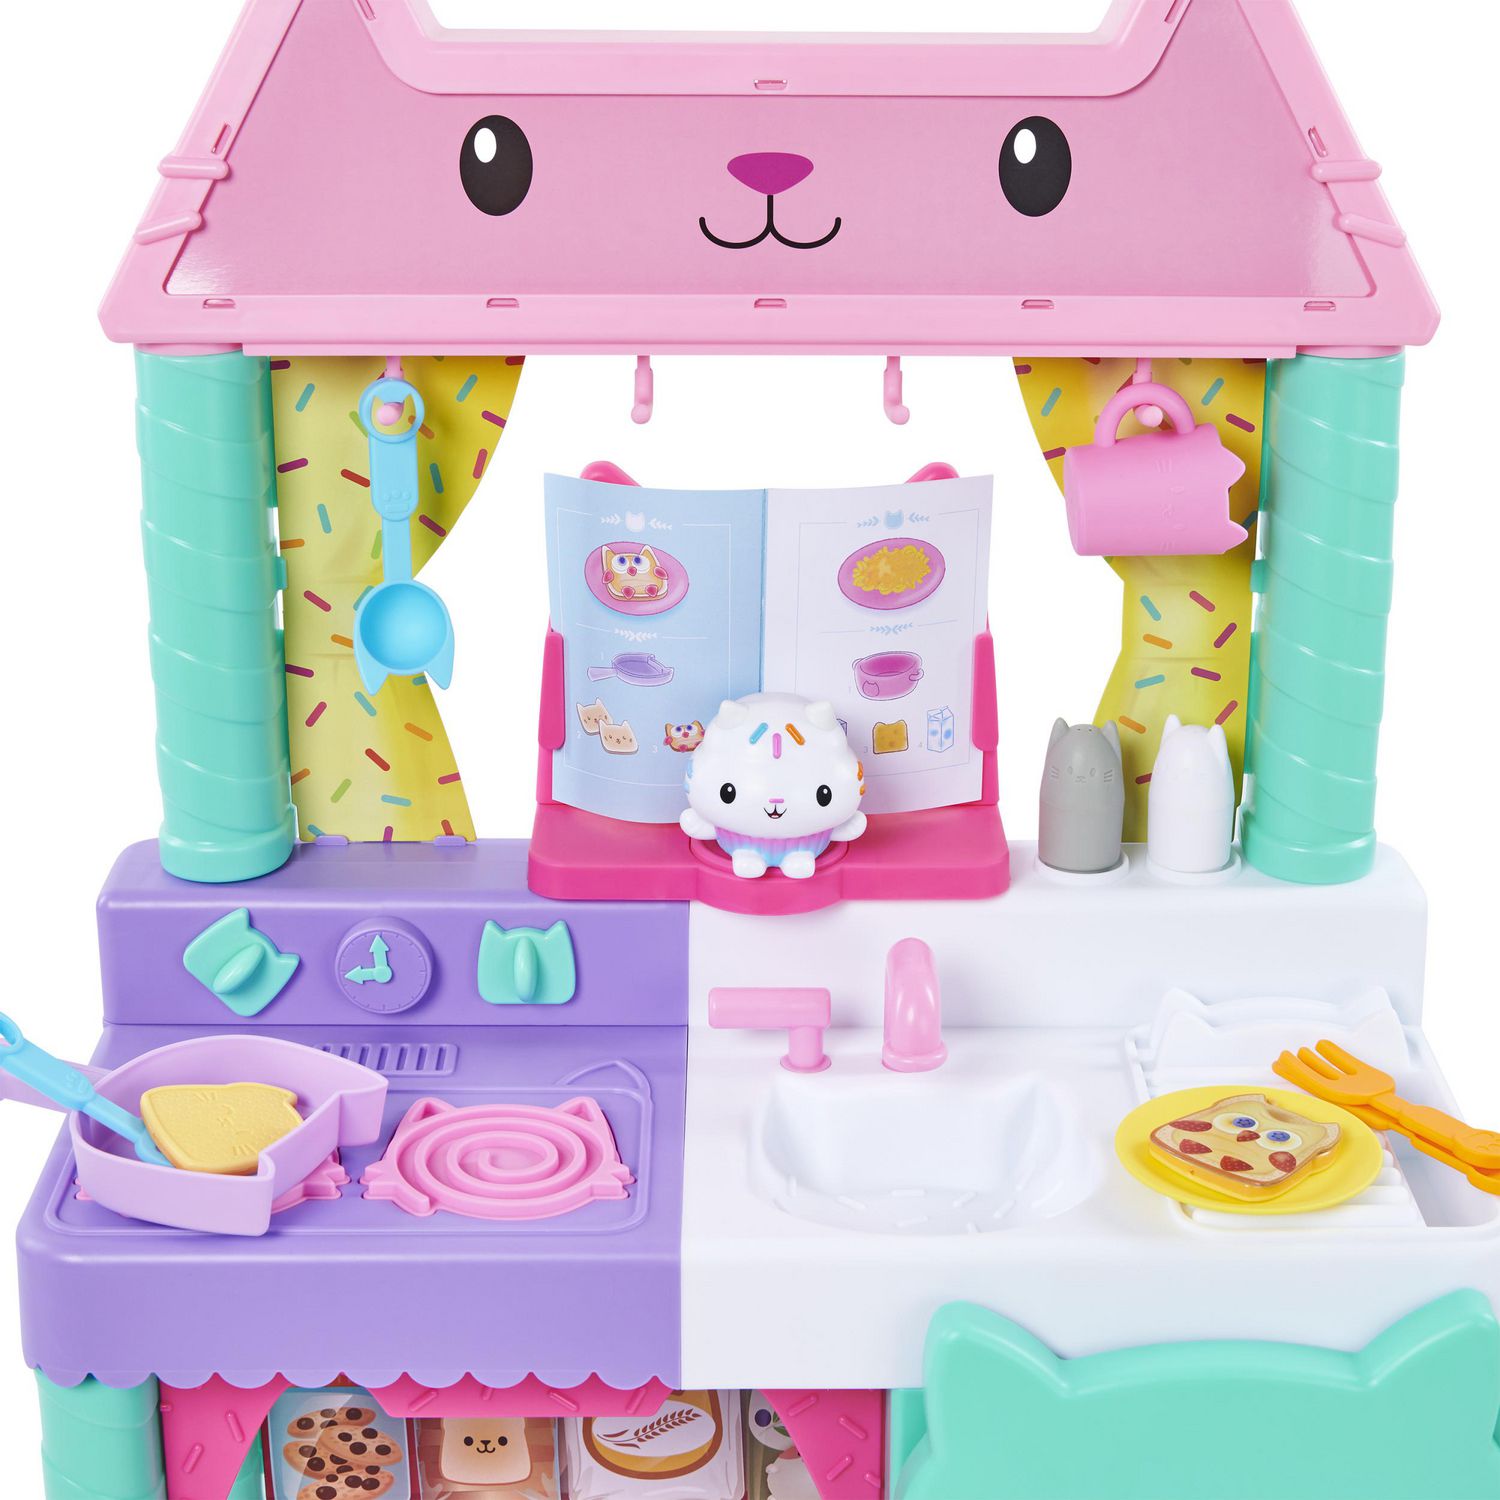 Kripyery Dollhouse Toys, Highly Reversible Dollhouse Mini Kitchen Stove  Model, Unique Accessories for Children\'s Dollhouses, Imaginative Toys for  Boys and Girls Over 3 Years Old. Sets One Size 